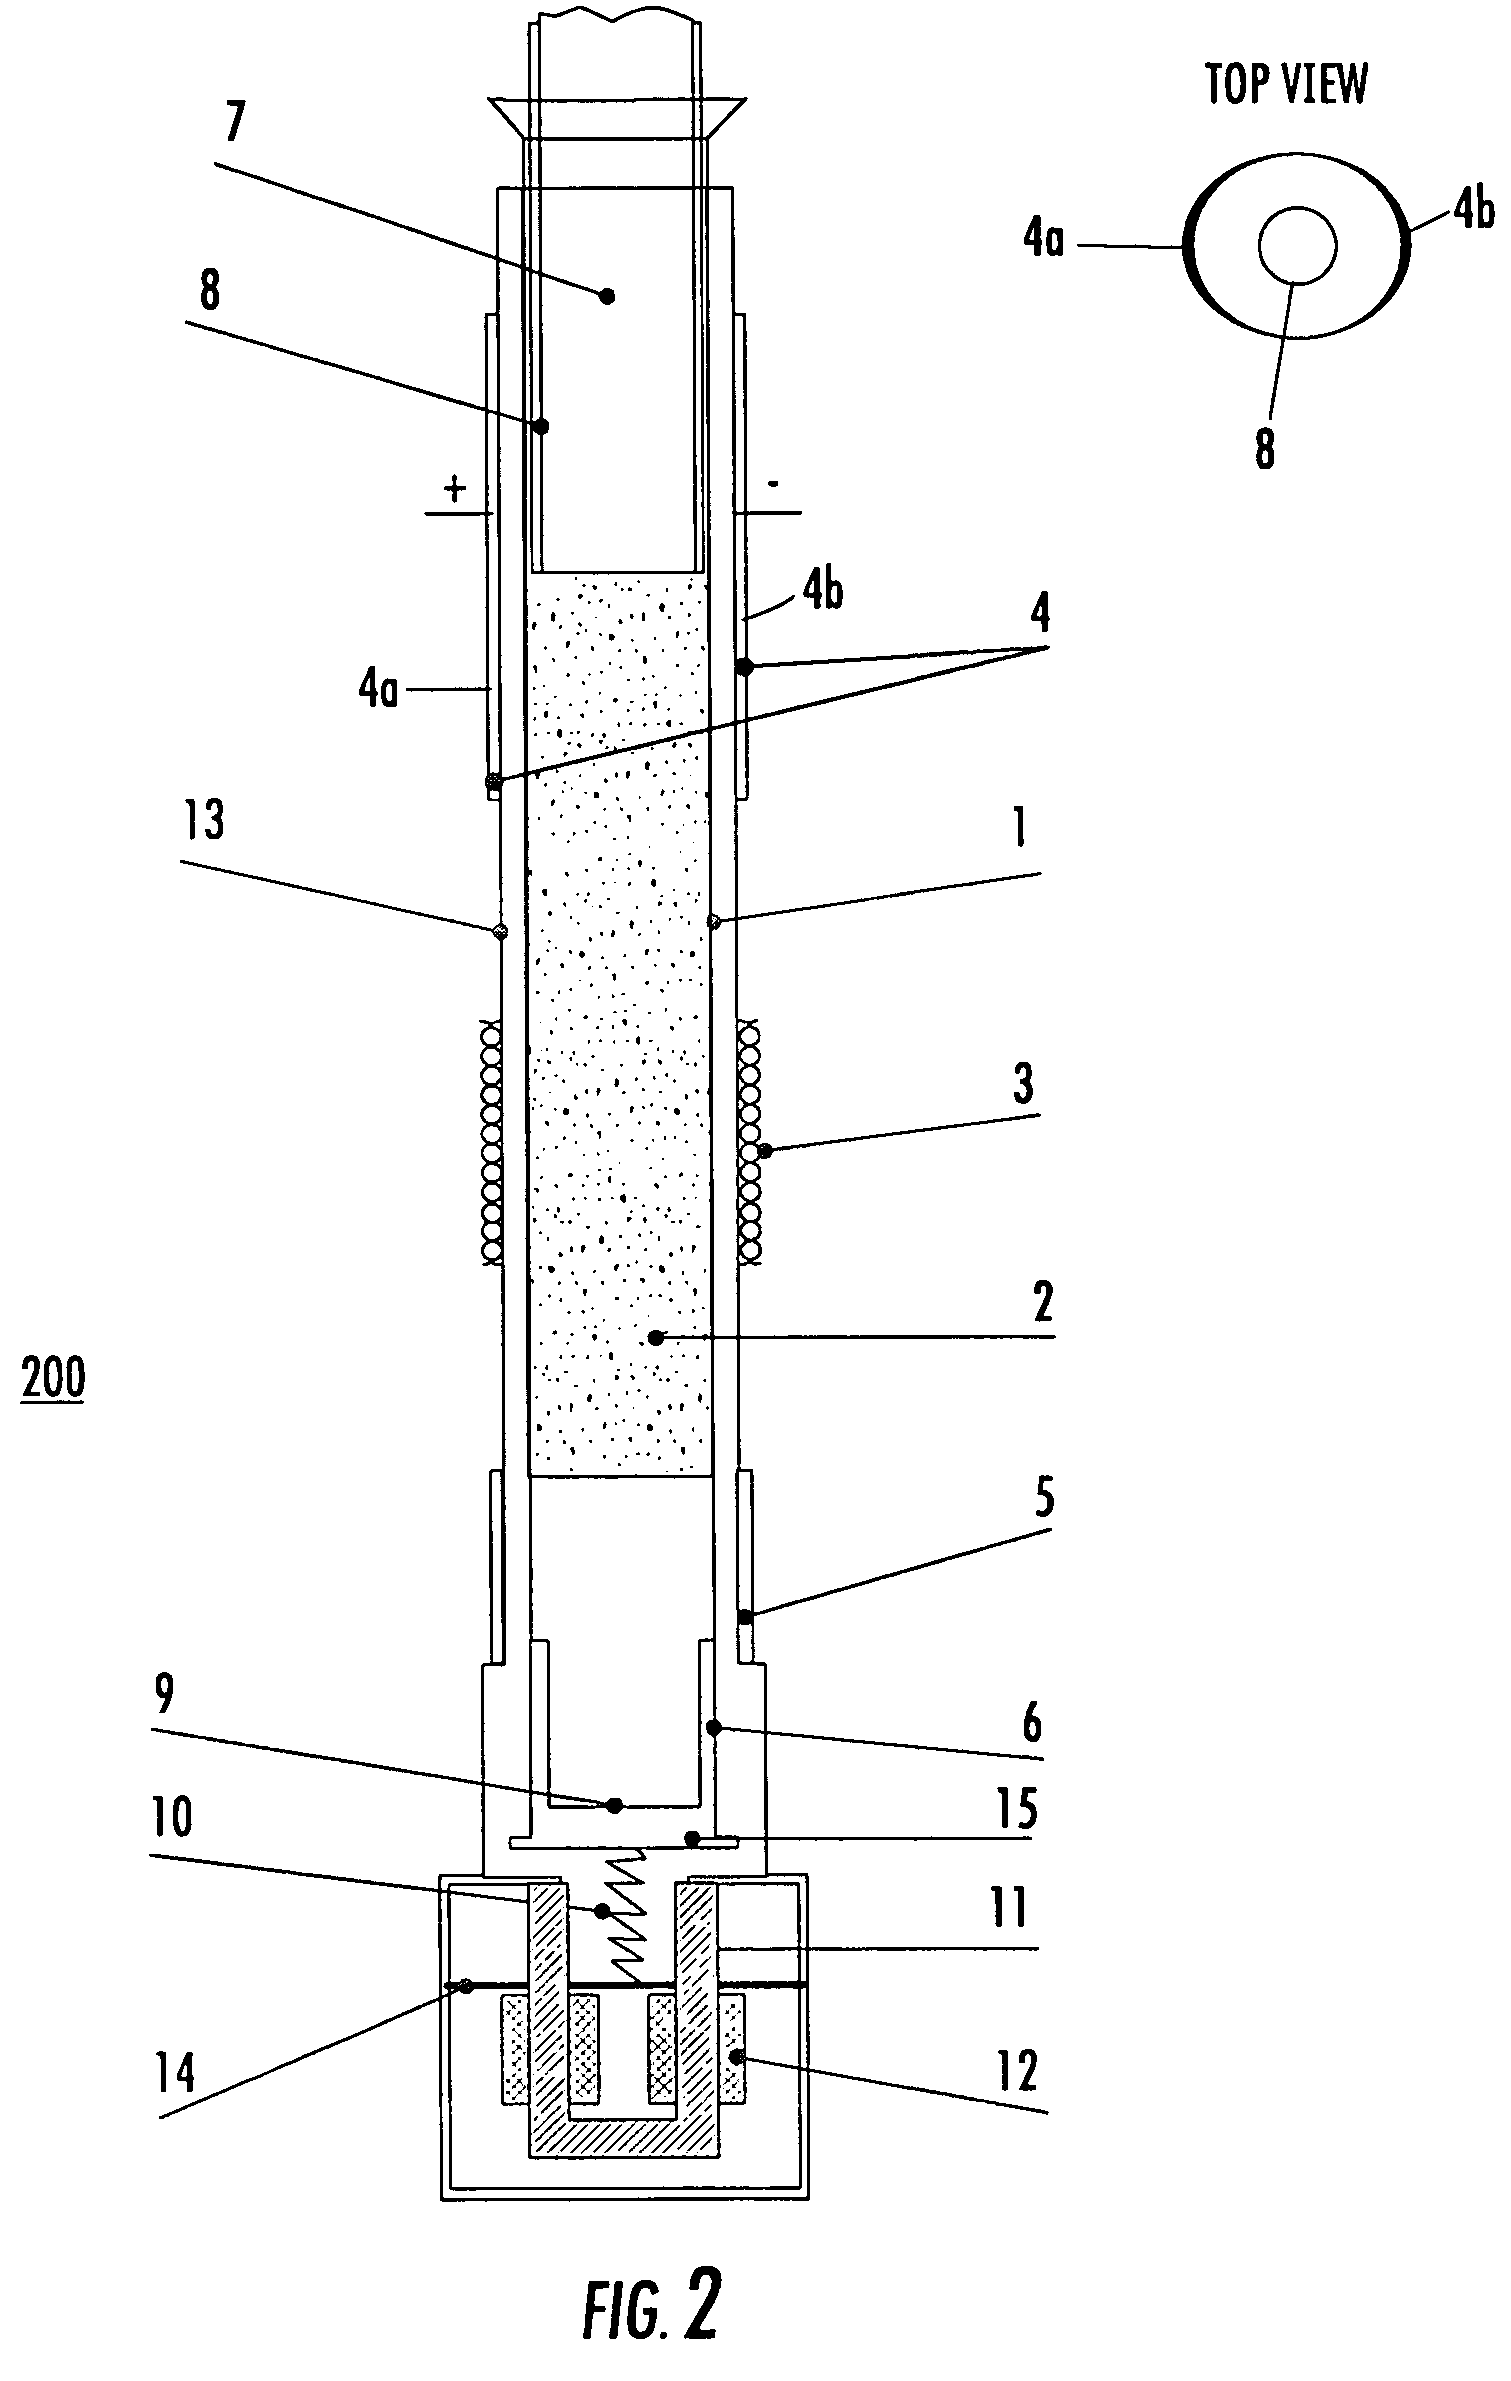 Method and apparatus for measuring conductivity of powder materials using eddy currents